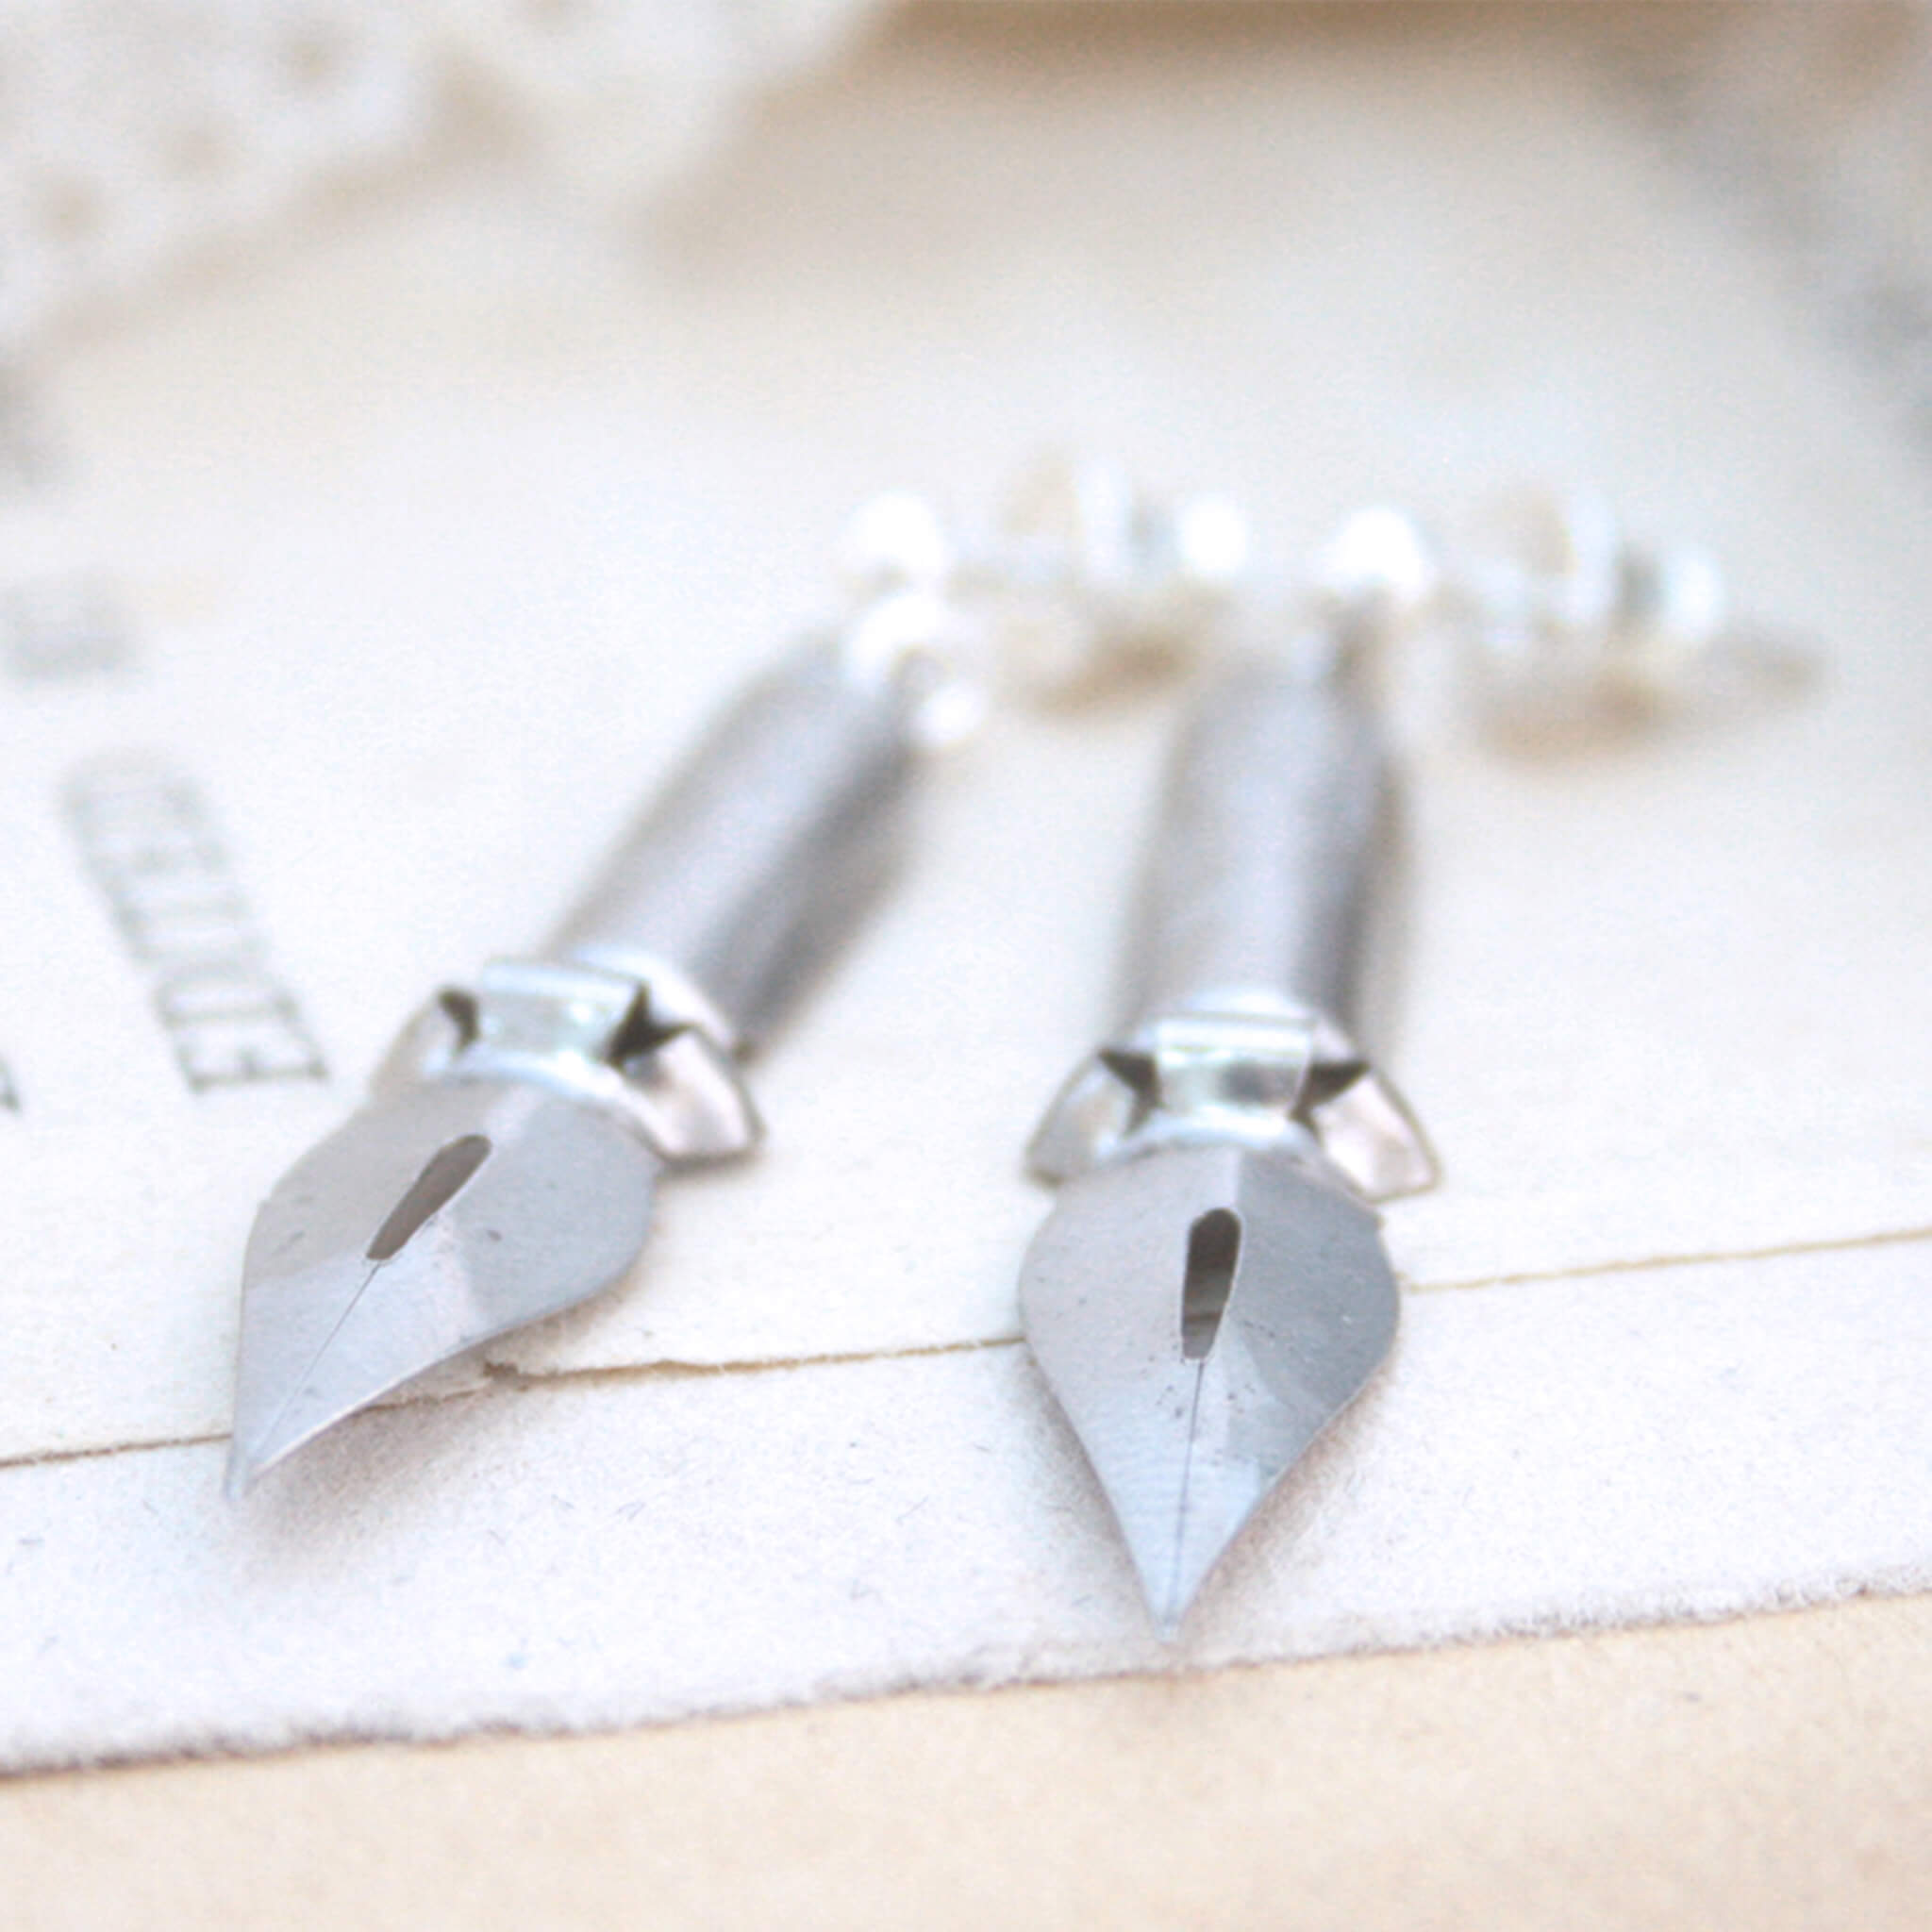 quirky earrings made of antique pen nibs lying on an old book